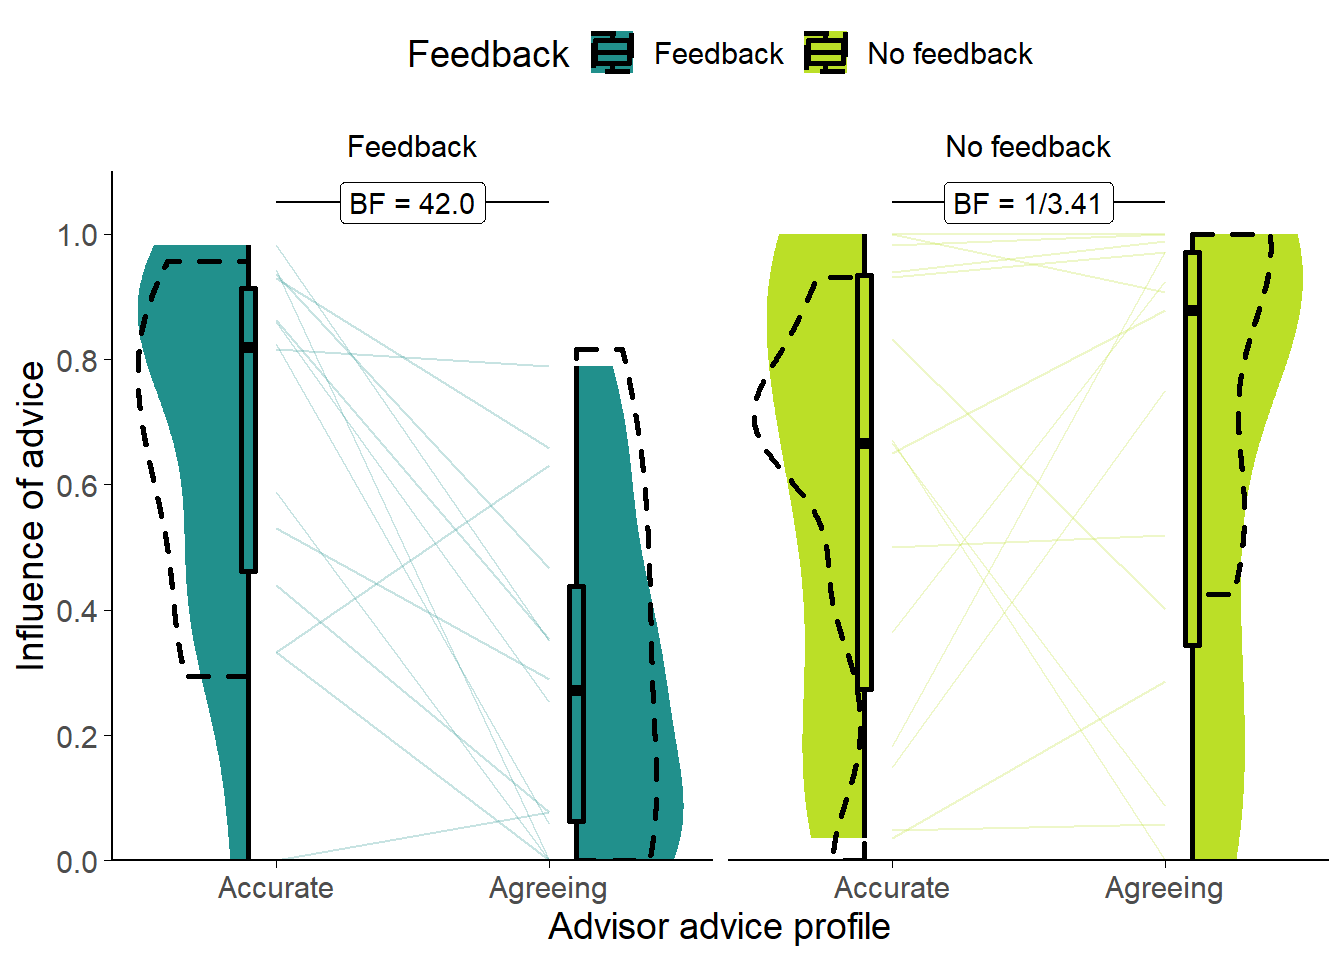 Dates task advisor influence for High accuracy/agreement advisors.<br/> Shows the influence of the advice of the advisors. The shaded area and boxplots indicate the distribution of the individual participants' mean influence of advice. Individual means for each participant are shown with lines in the centre of the graph. The dashed outline shows the distribution of participant means in the original study of which this is a replication.